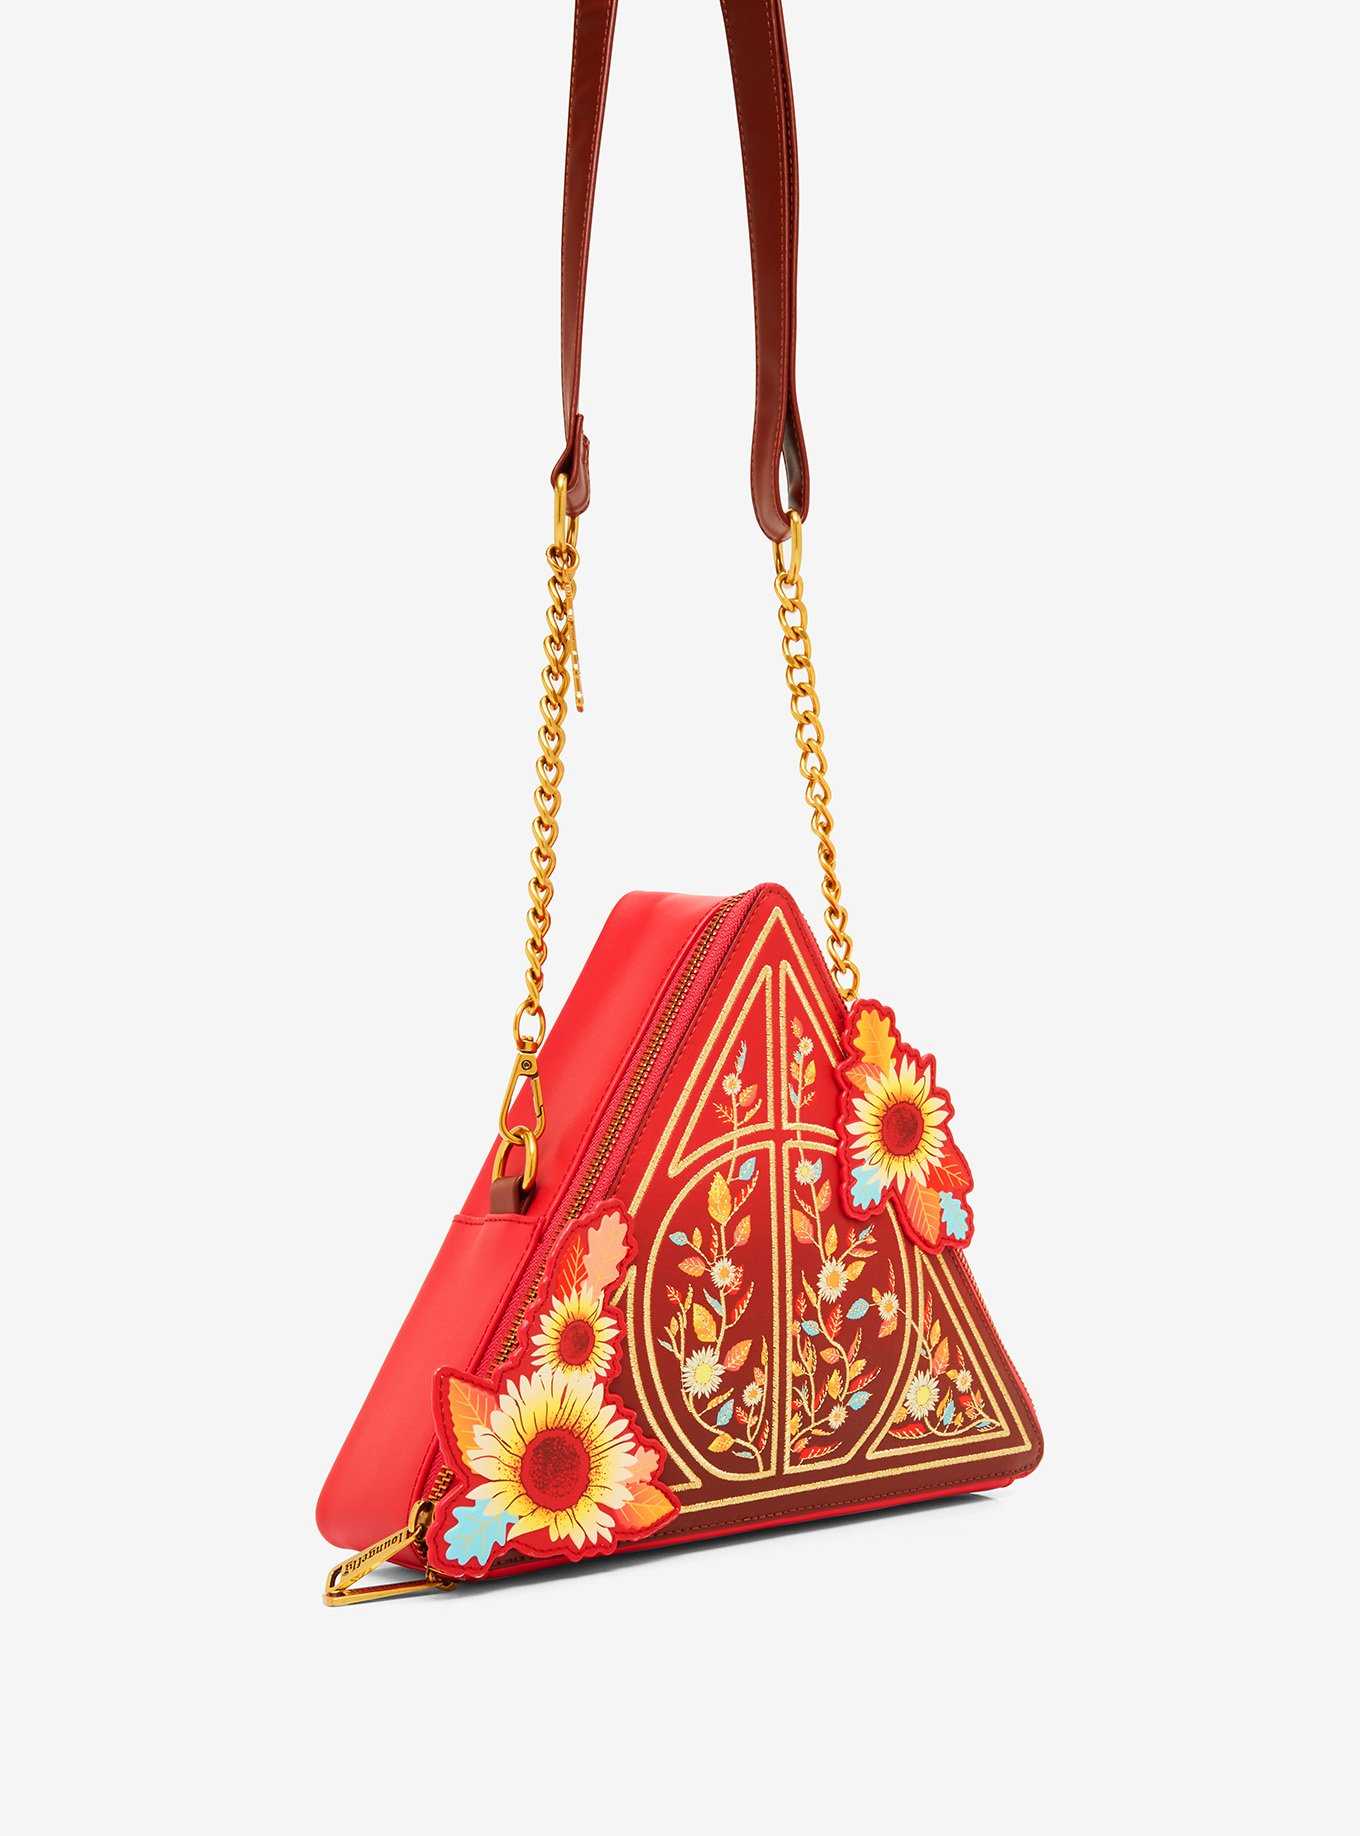 Loungefly Harry Potter Floral Deathly Hallows Figural Crossbody Bag, , hi-res